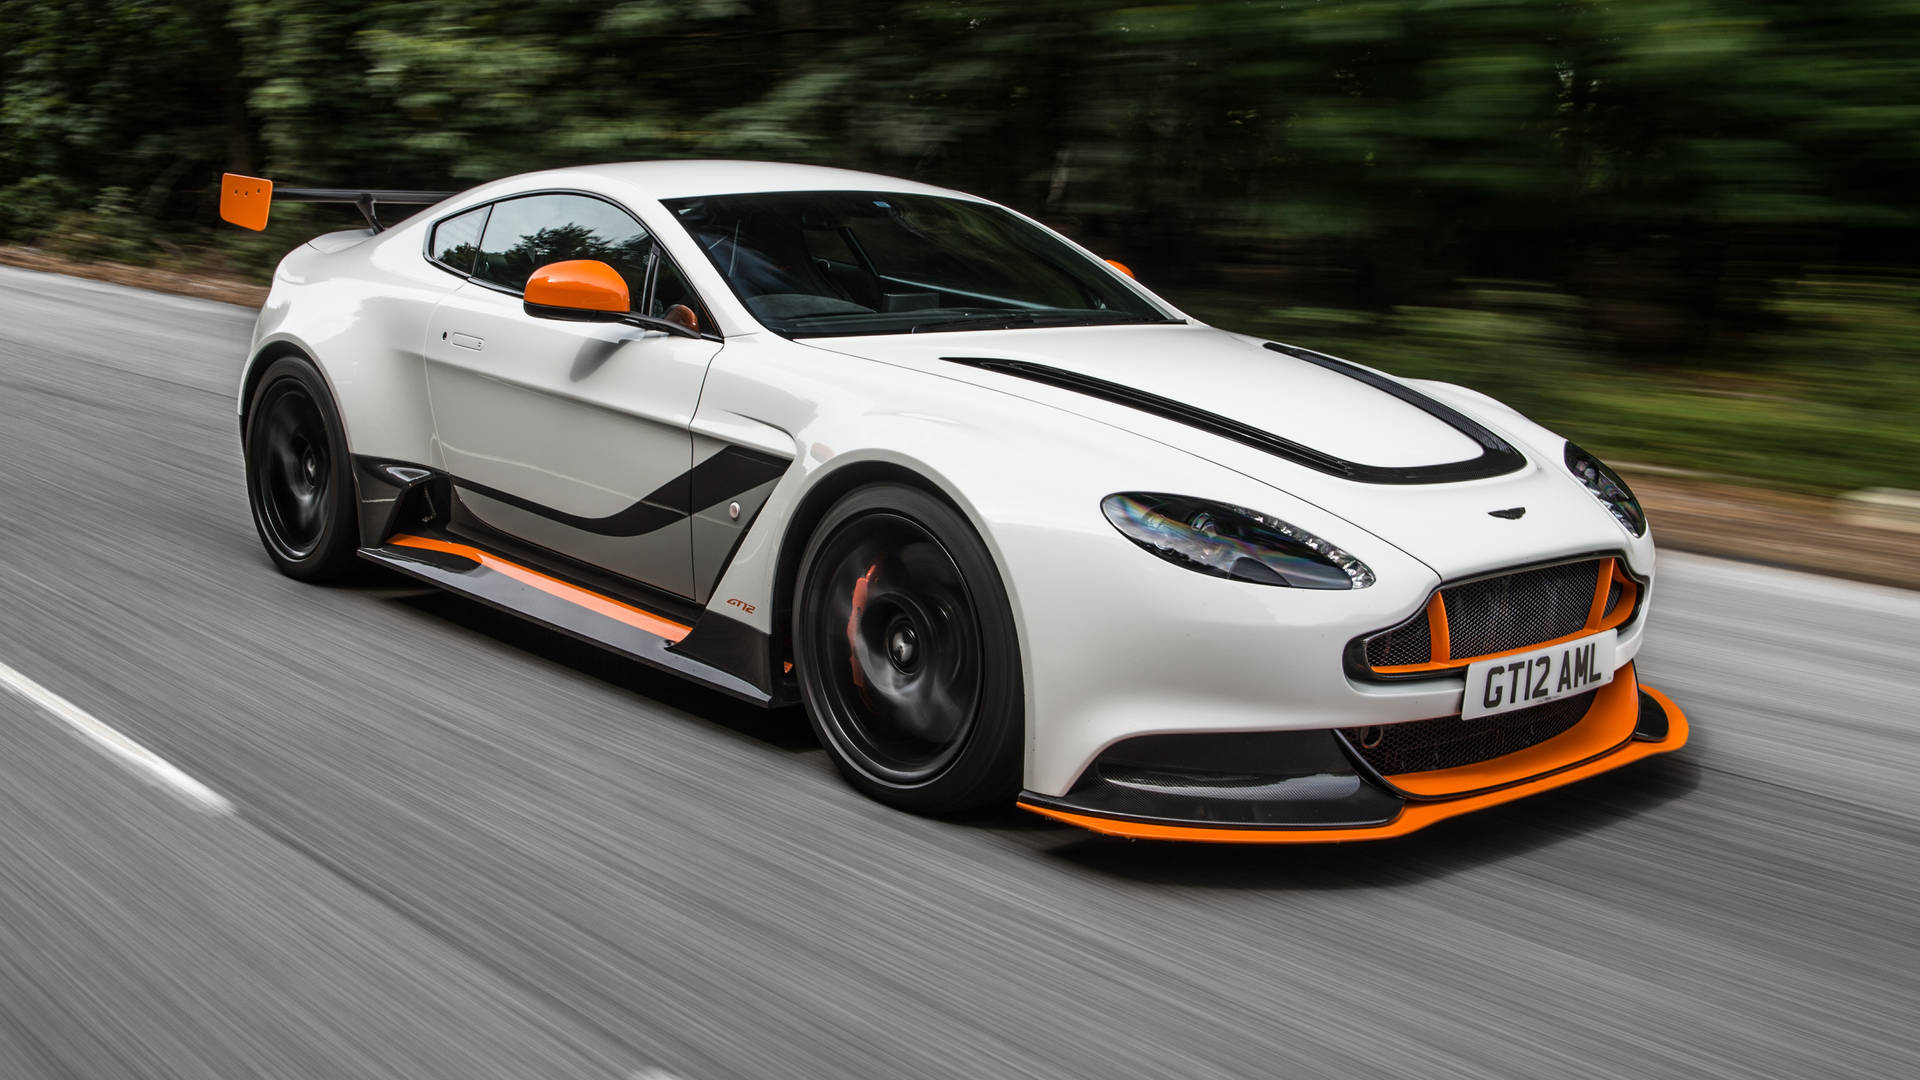 4096X2304 Aston Martin Wallpaper and Background